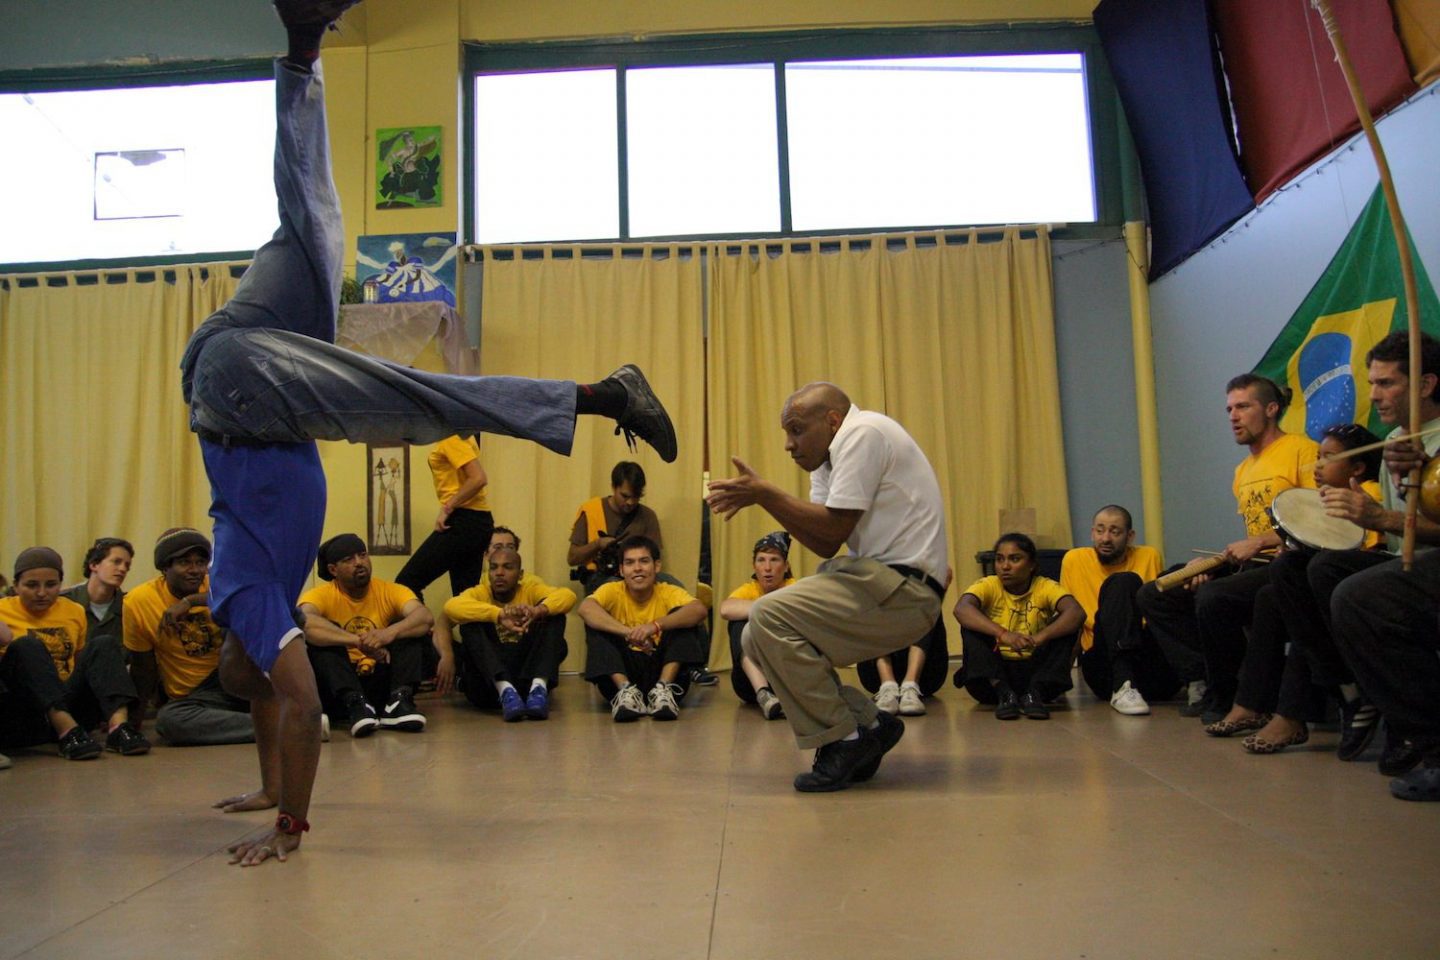 An awesome black man in a crisp white short and khakis crouches while dodging his fellow sparing partner's foot, the other man has two hands on the floor, one leg up high and one leg mid-swing across. Onlookers in yellow shirts and black pants sit in a circle (a capoeira roda) on the floor.